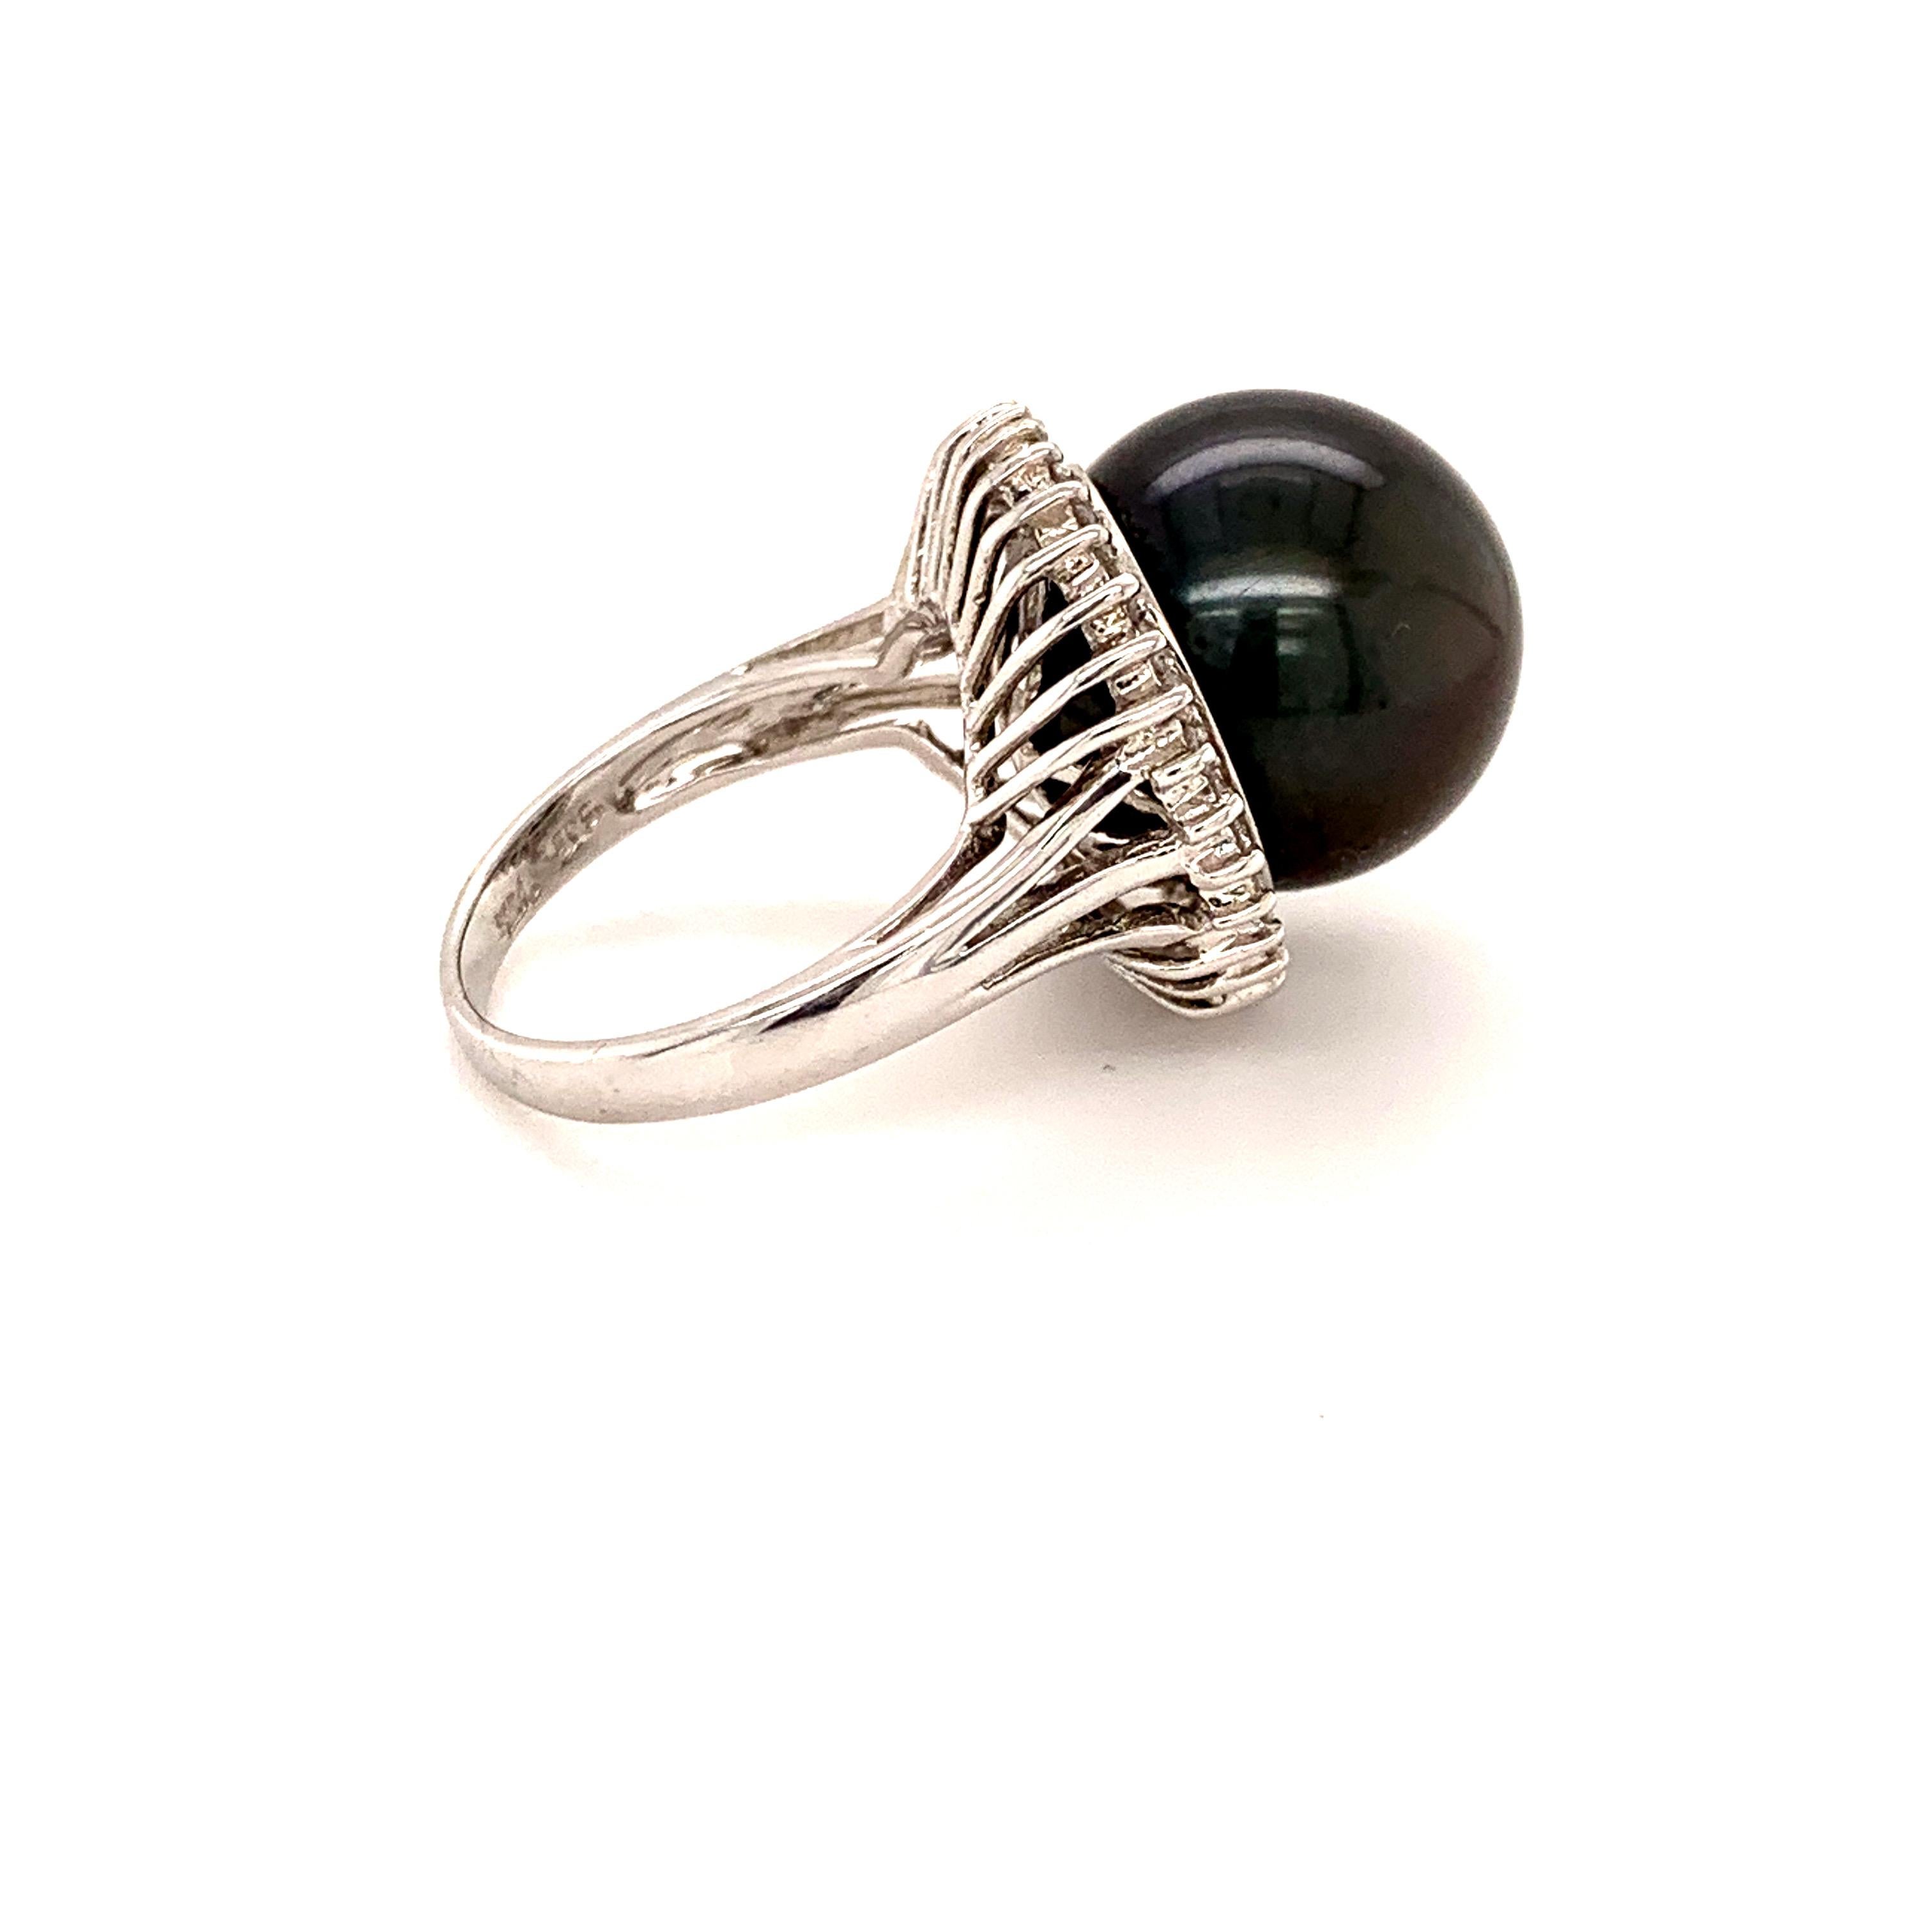 Bold Tahitian pearl diamond cocktail ring. Very good lustre, black with rose, silver overtone, 14.5mm round Tahitian pearl mounted in high profile, accented with round brilliant cut diamonds. Handcrafted contemporary high polished design set in 14